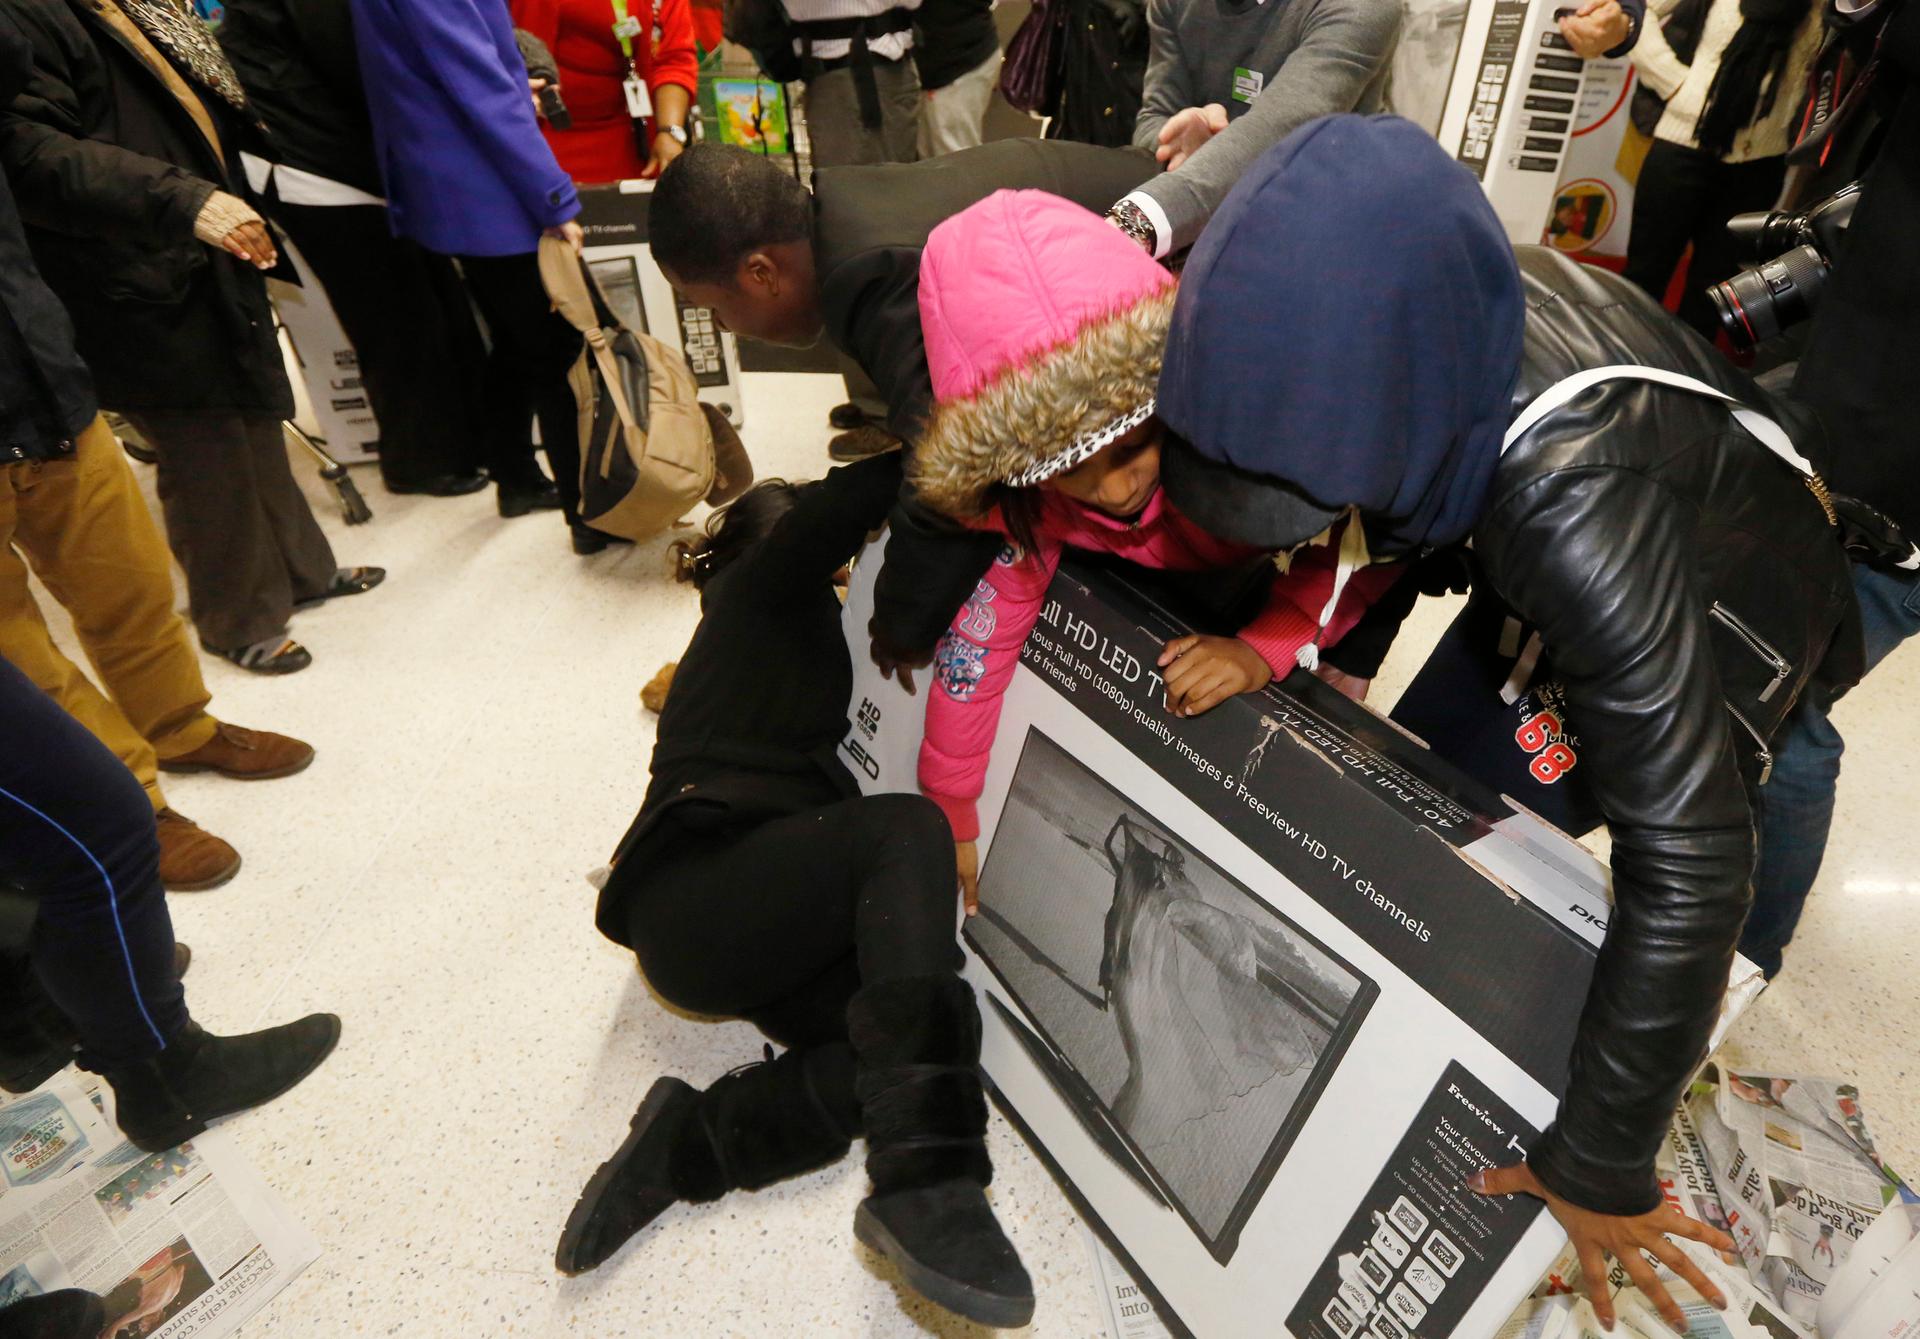 Shoppers wrestle over a television as they compete to purchase retail items on 